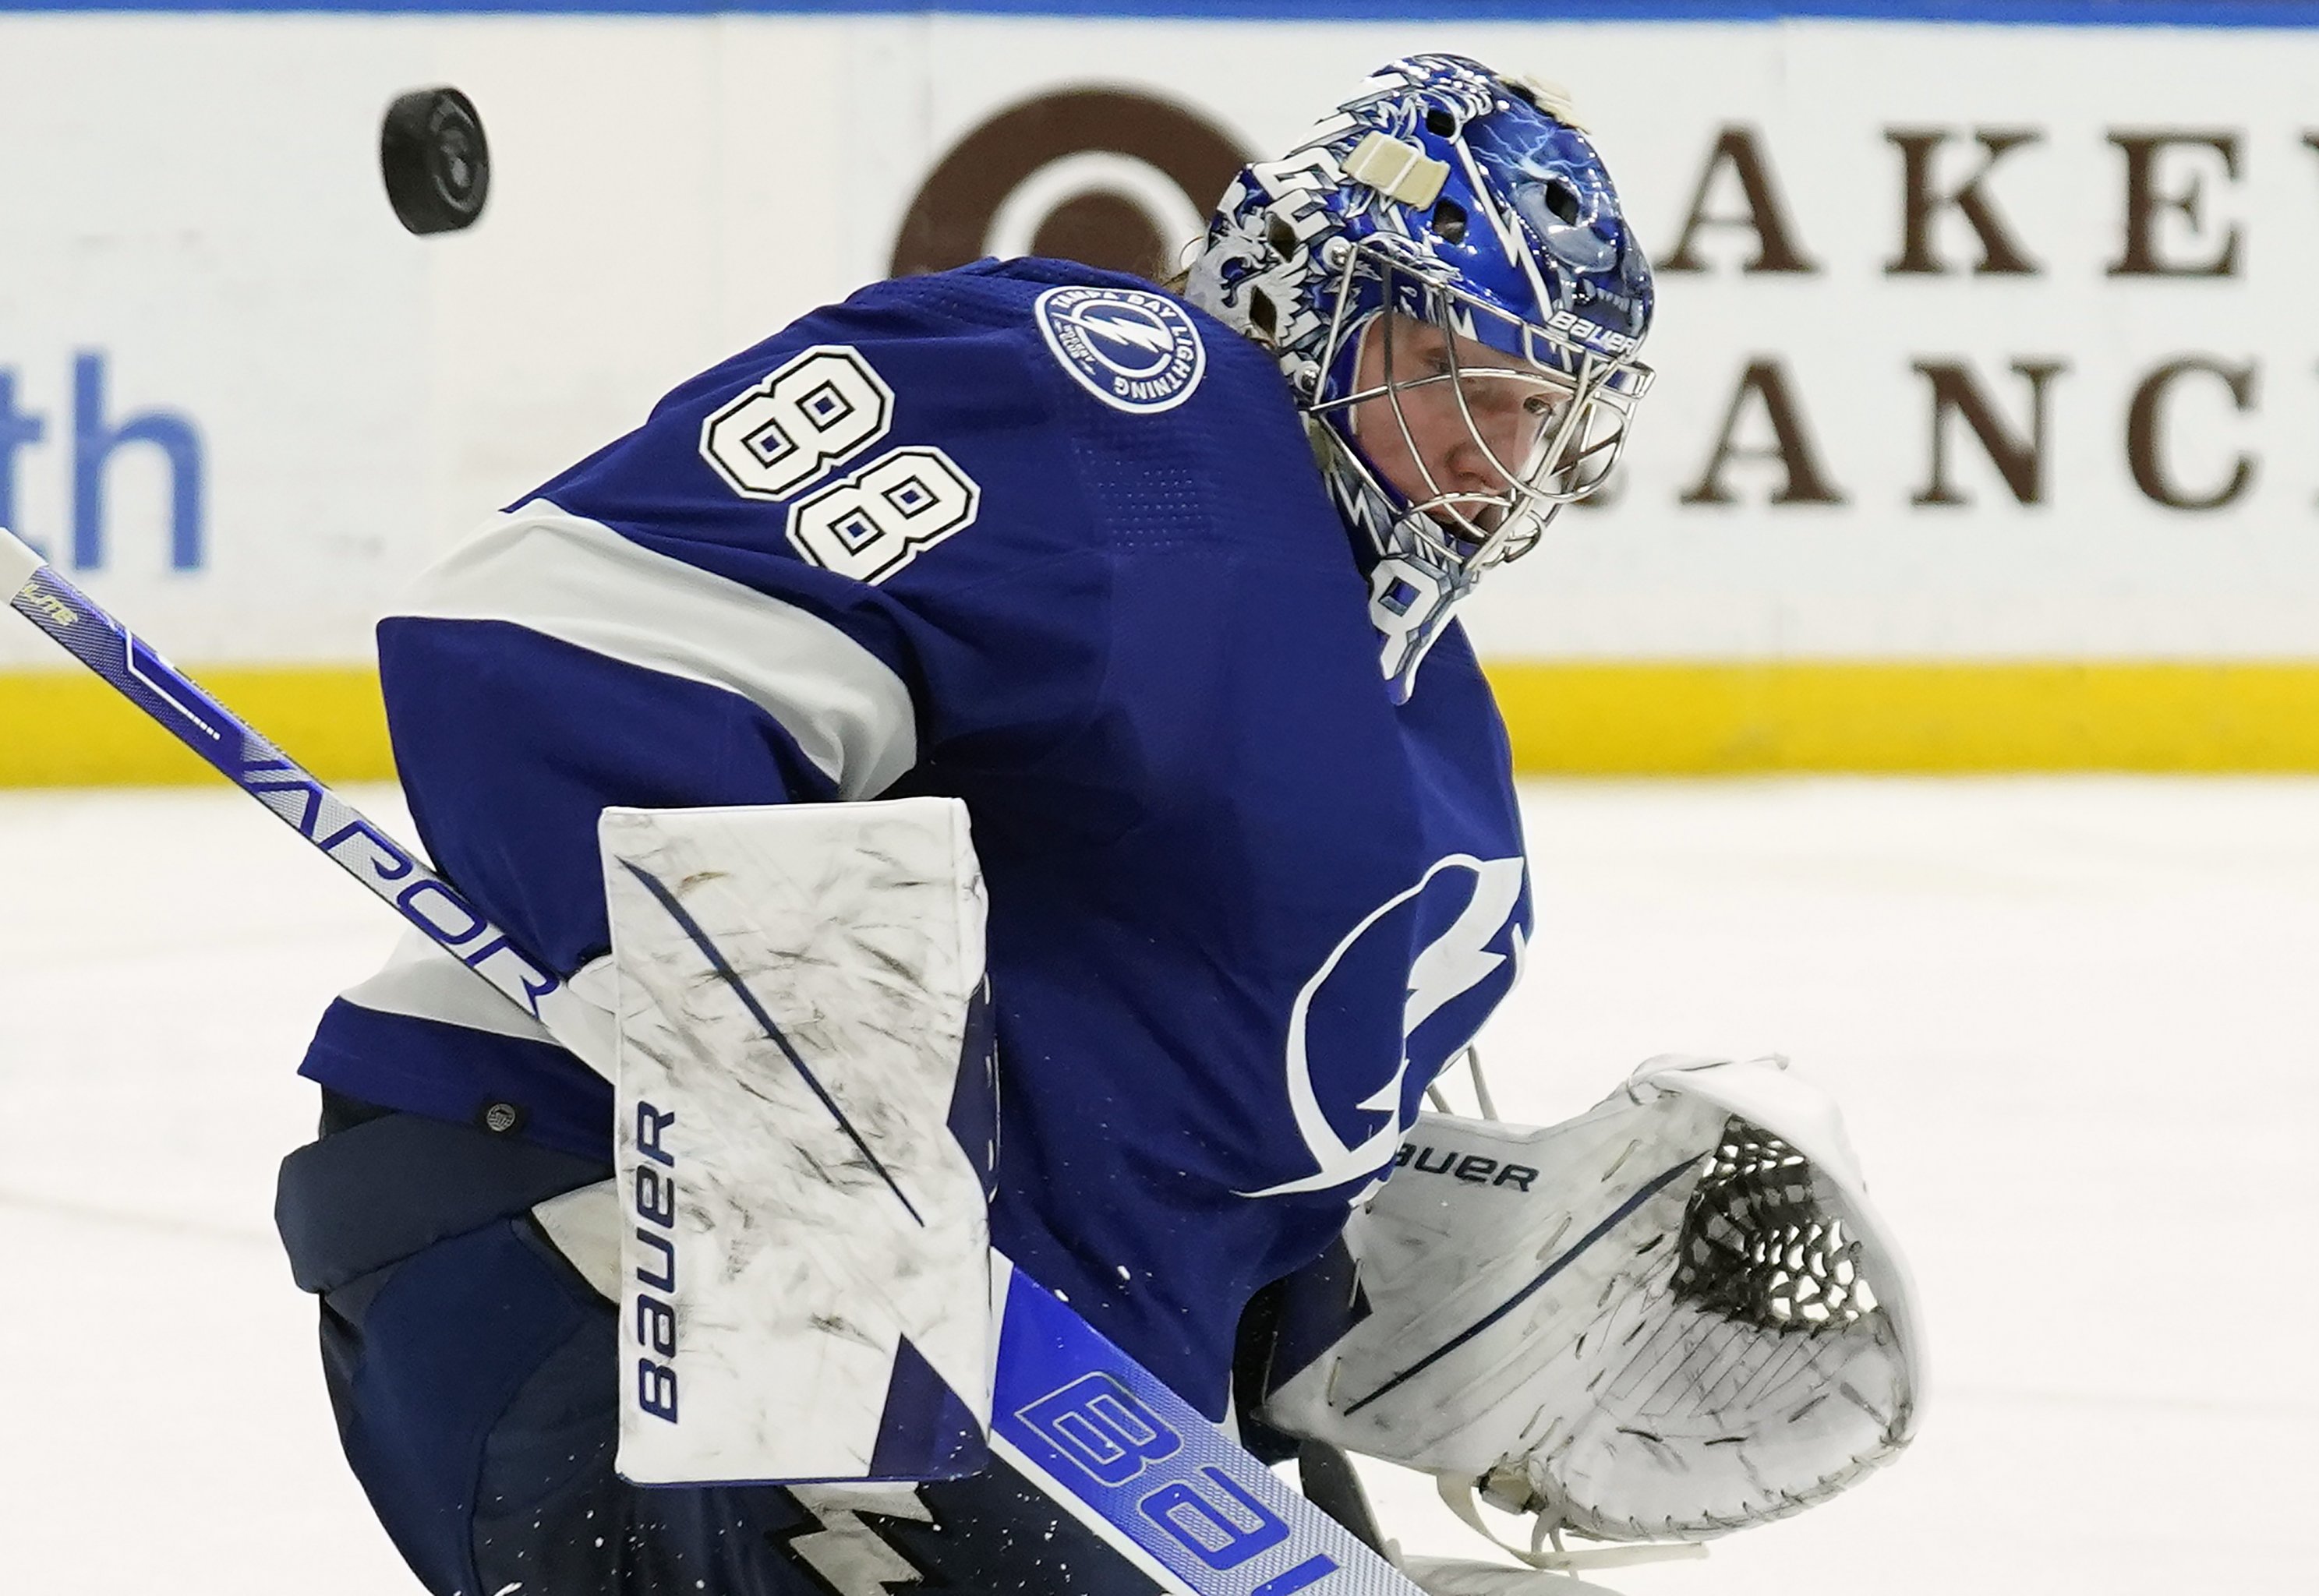 Backup Hockey Player Becomes Oldest Goalie to Win NHL Debut